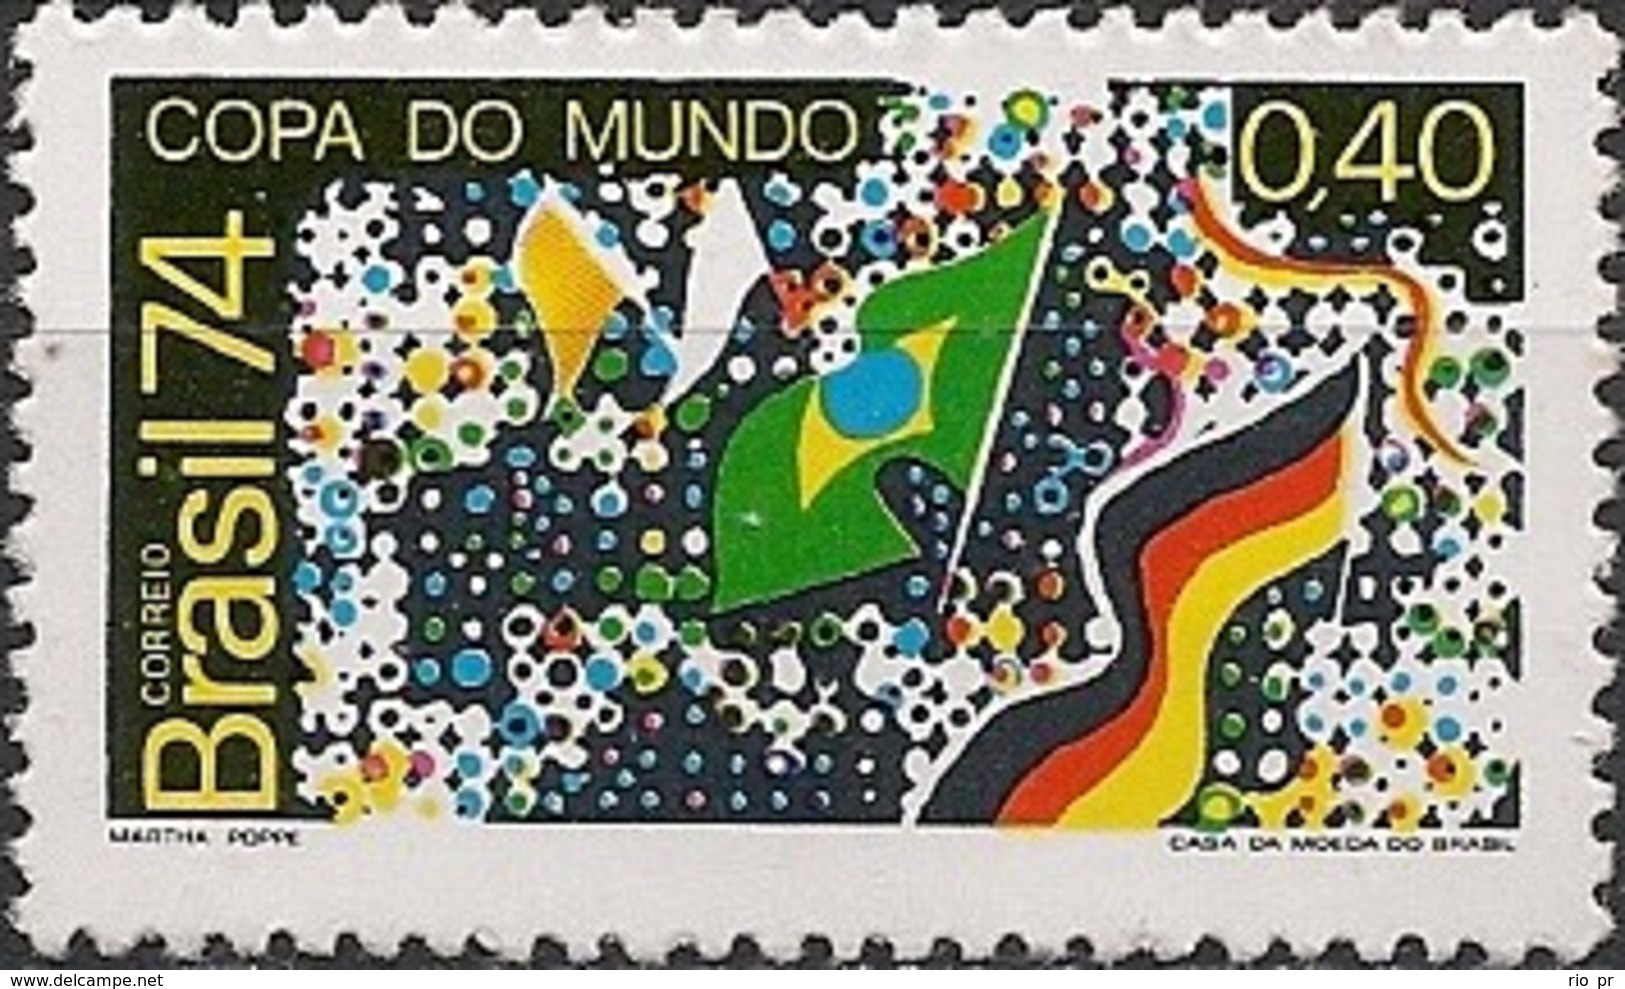 BRAZIL - WEST GERMANY'74 FIFA WORLD SOCCER CUP 1974 - MNH - 1974 – Germania Ovest